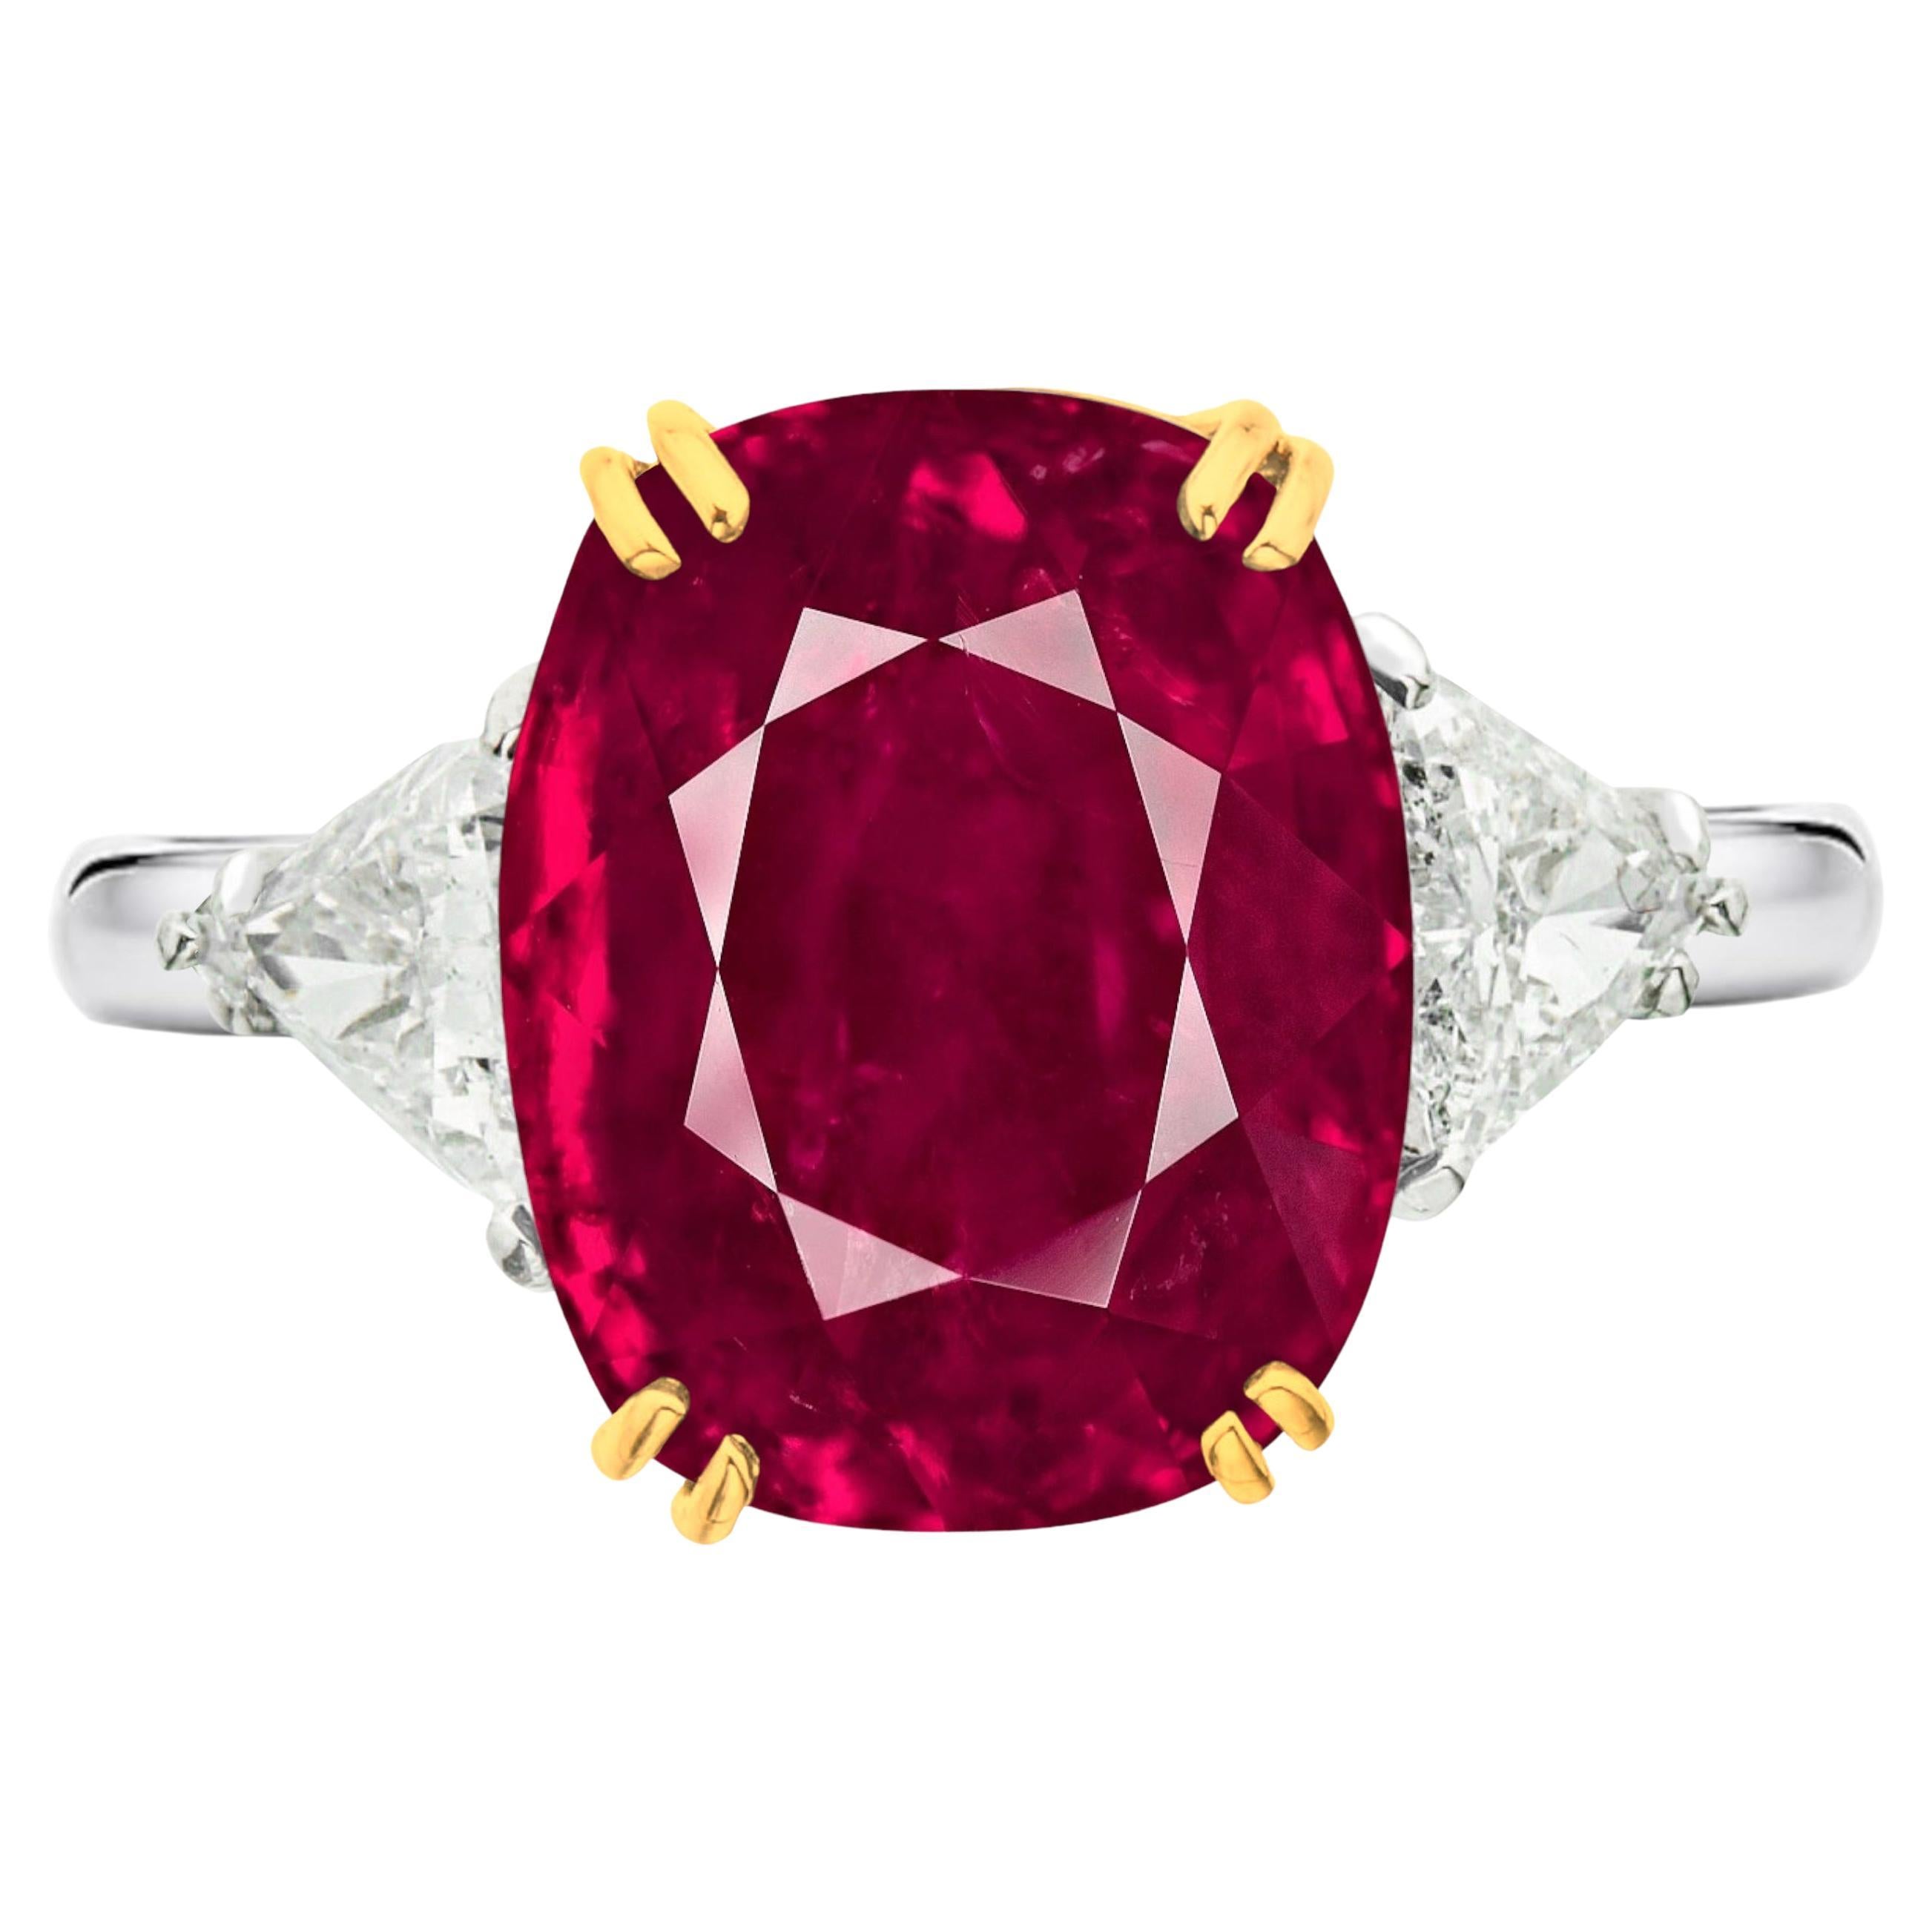 GIA Certified 5 Carat Unheated/Untreated Ruby from Mozambique